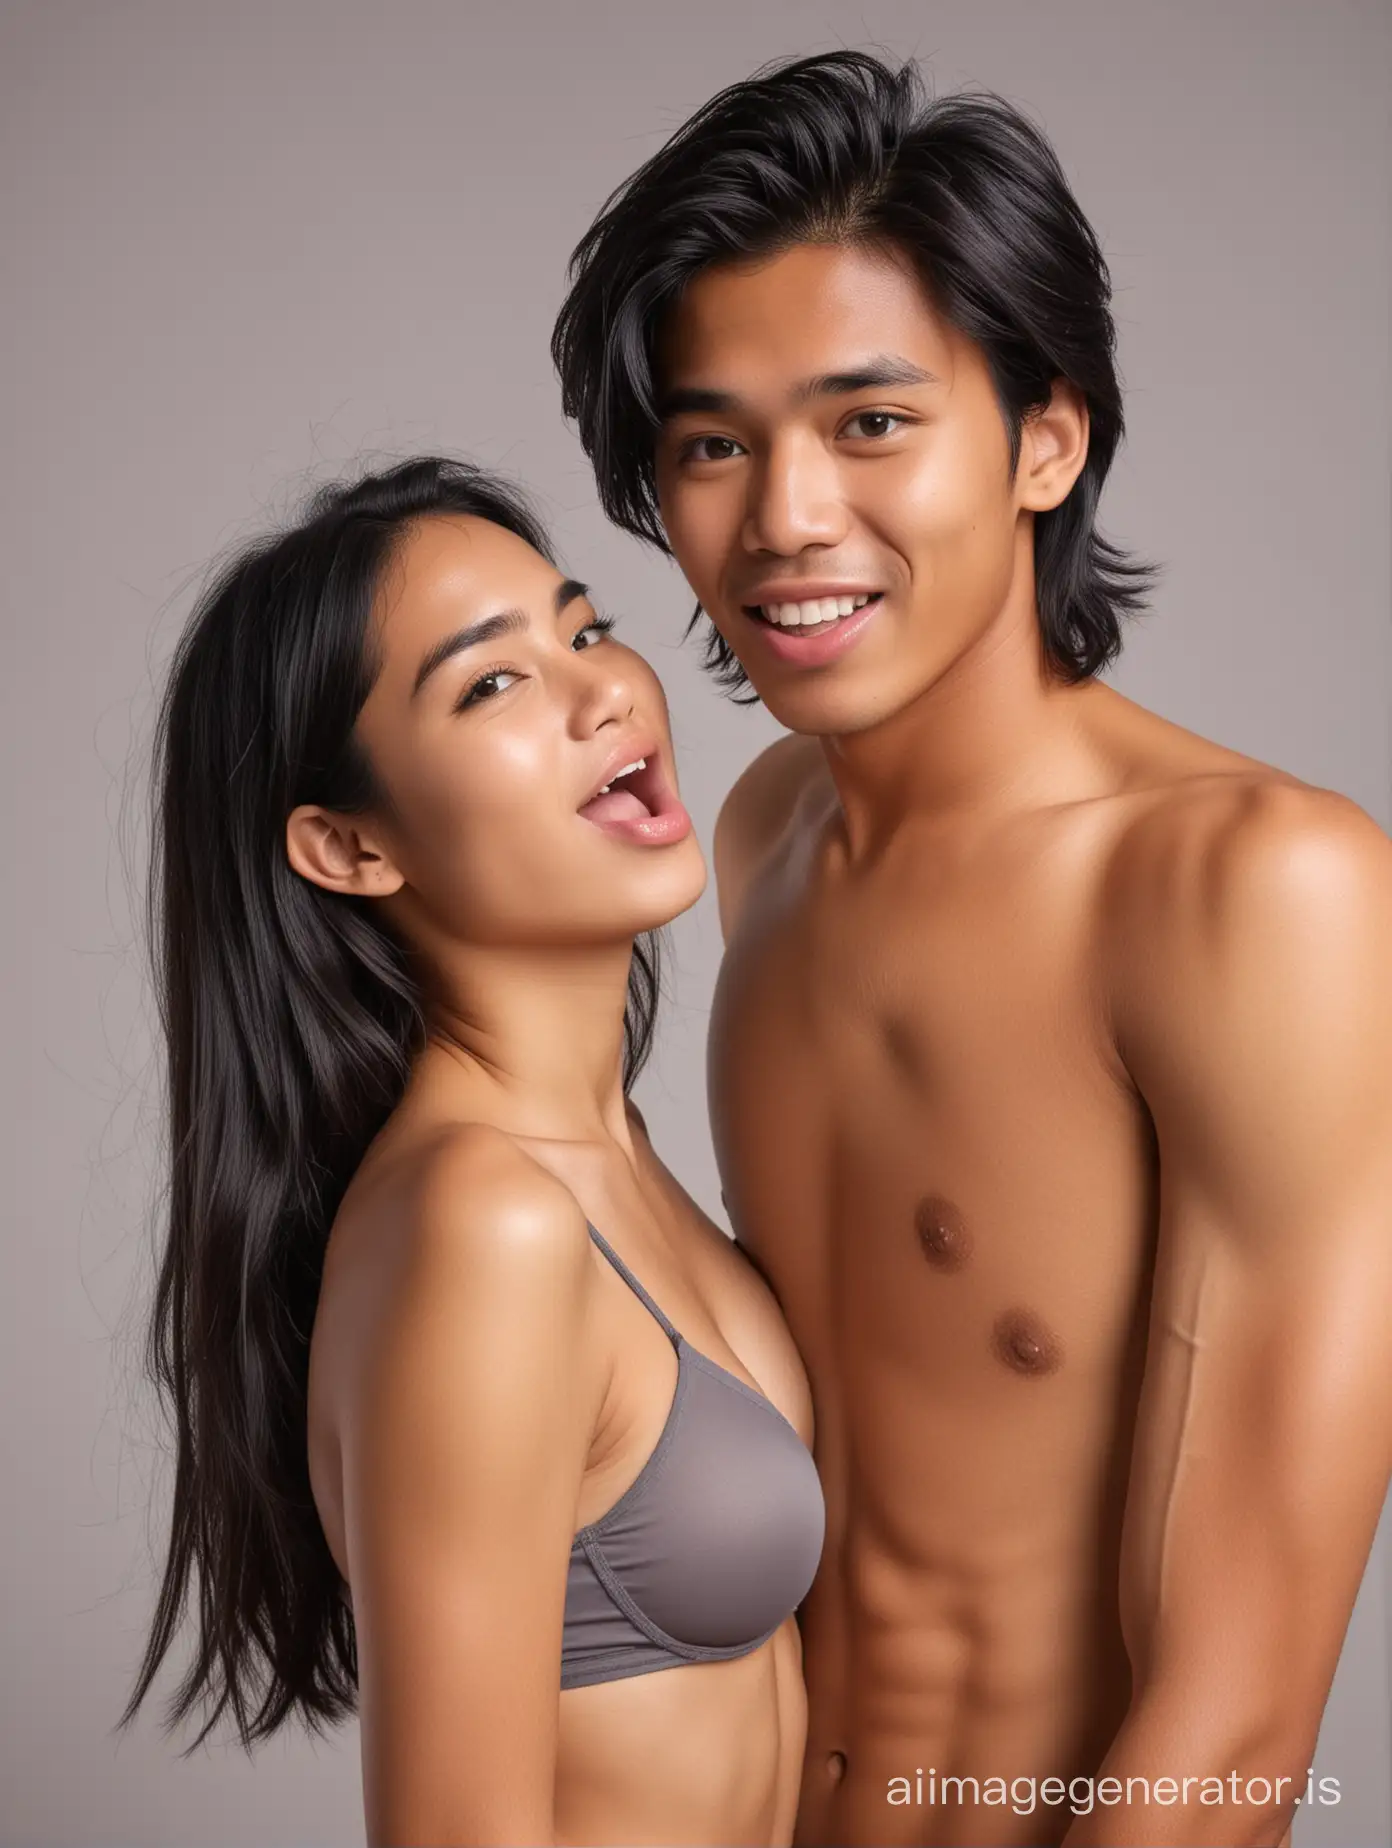 An indonesian boy, good looking, short thick black hair, is stunned because he got a good kiss on his right cheek from his beautiful girlfriend , she has long hair, she wearing grey bra. They boy is shirtless. The boy look at the camera feeling excited and  horny.